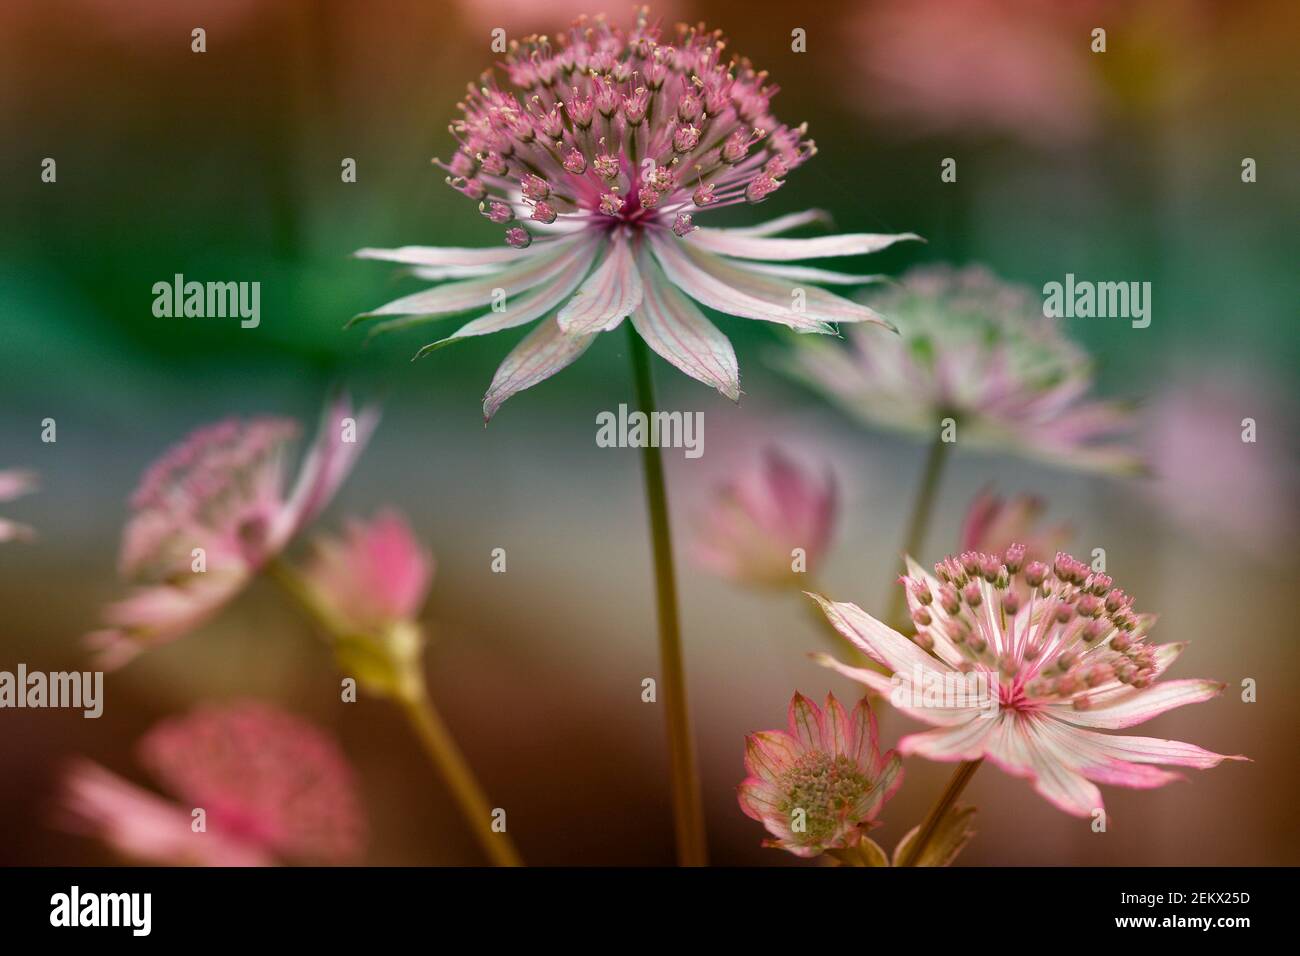 blurred foreground, and background flowers, bokeh, pinks, greens, abstract, floral, flora, nature, gardens, artistic, fine art photography Stock Photo